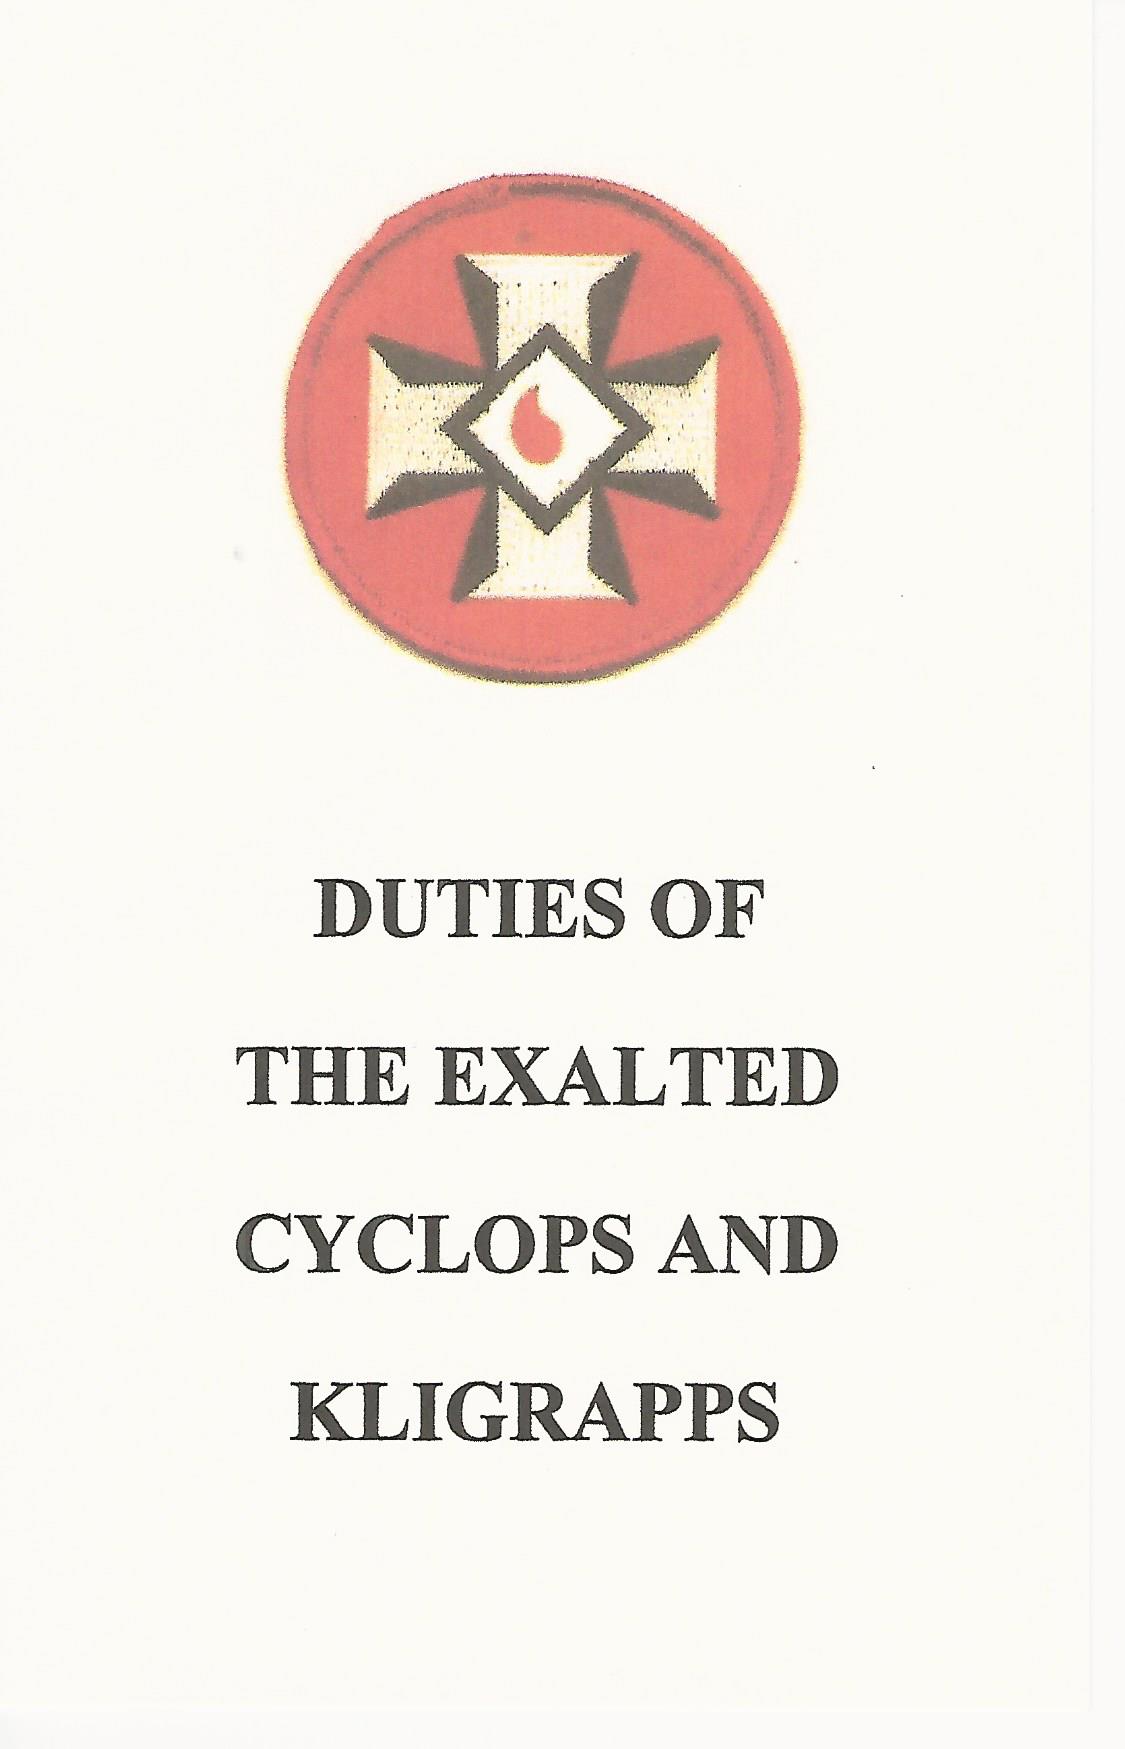 Duties of the Exalted Cyclops and Kligrapps